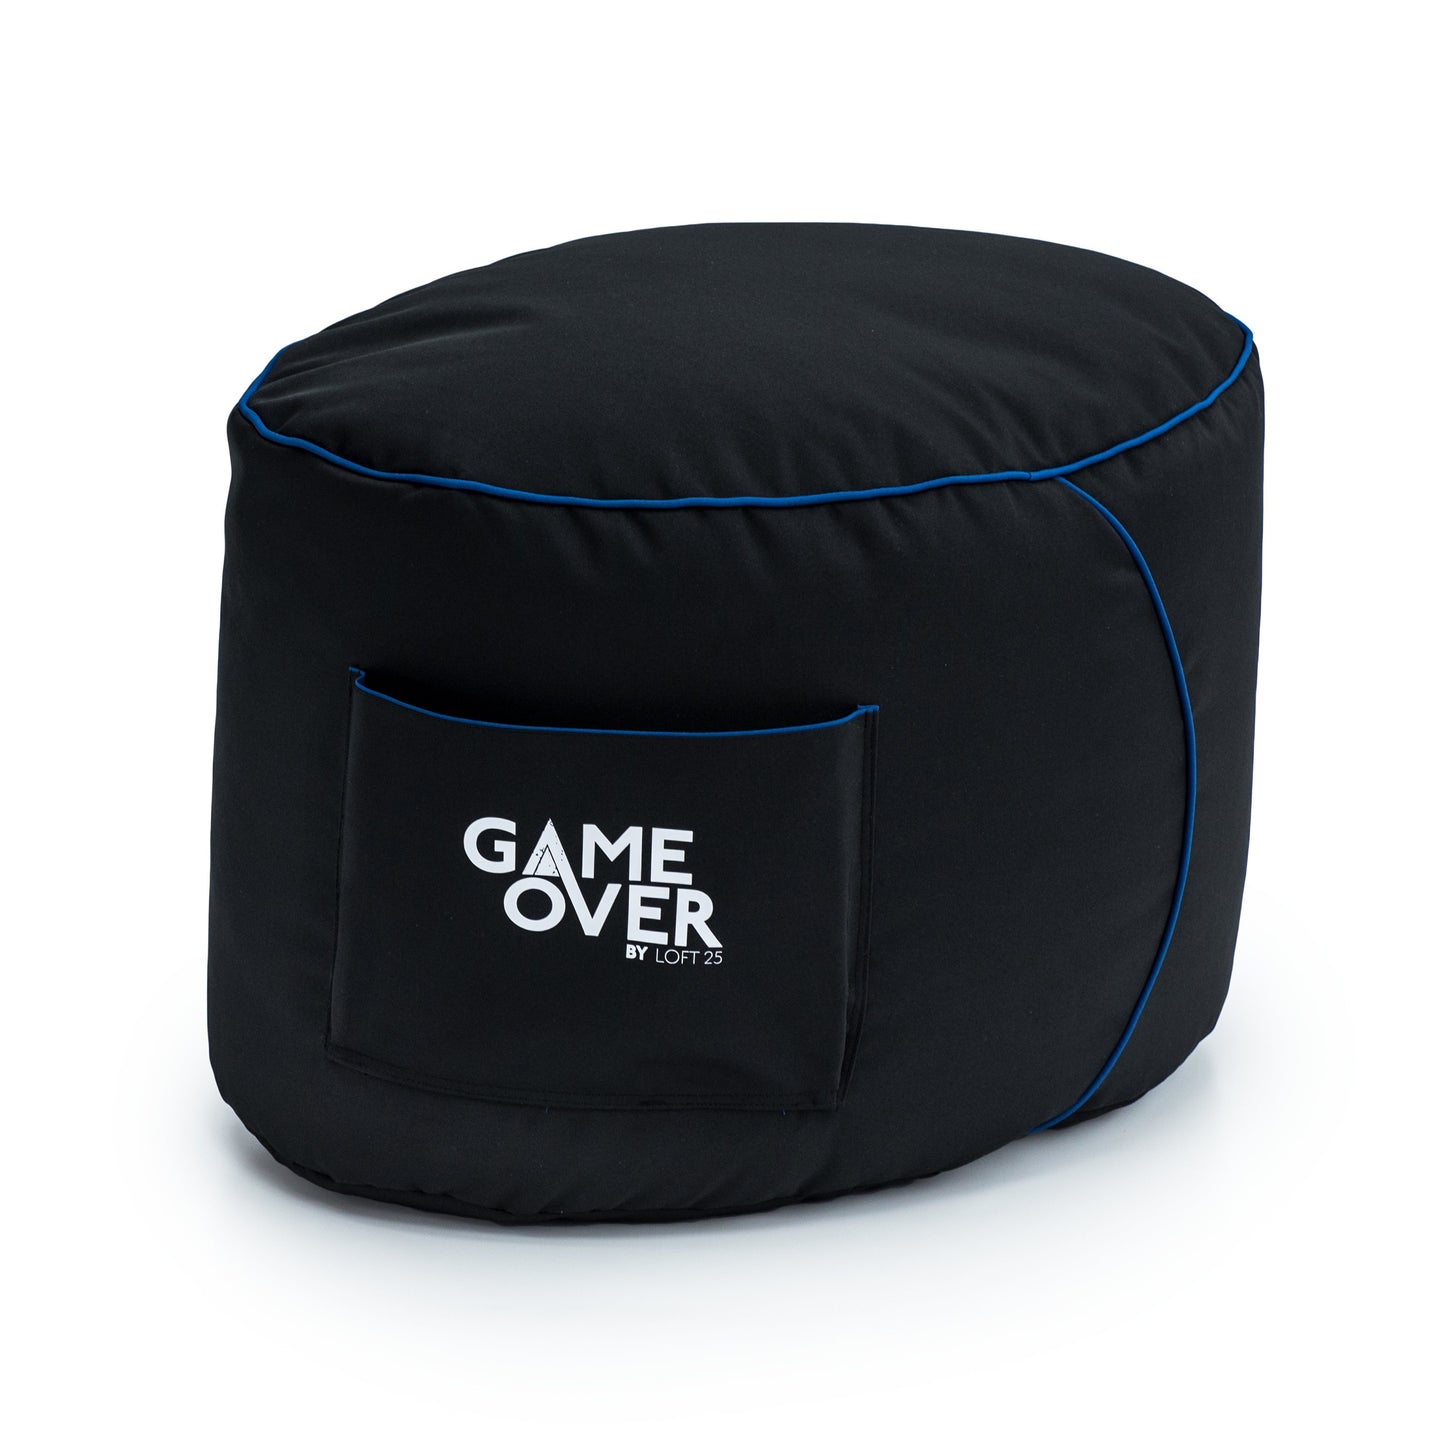 Black bean bag ottoman with red trim and "GAME OVER" logo